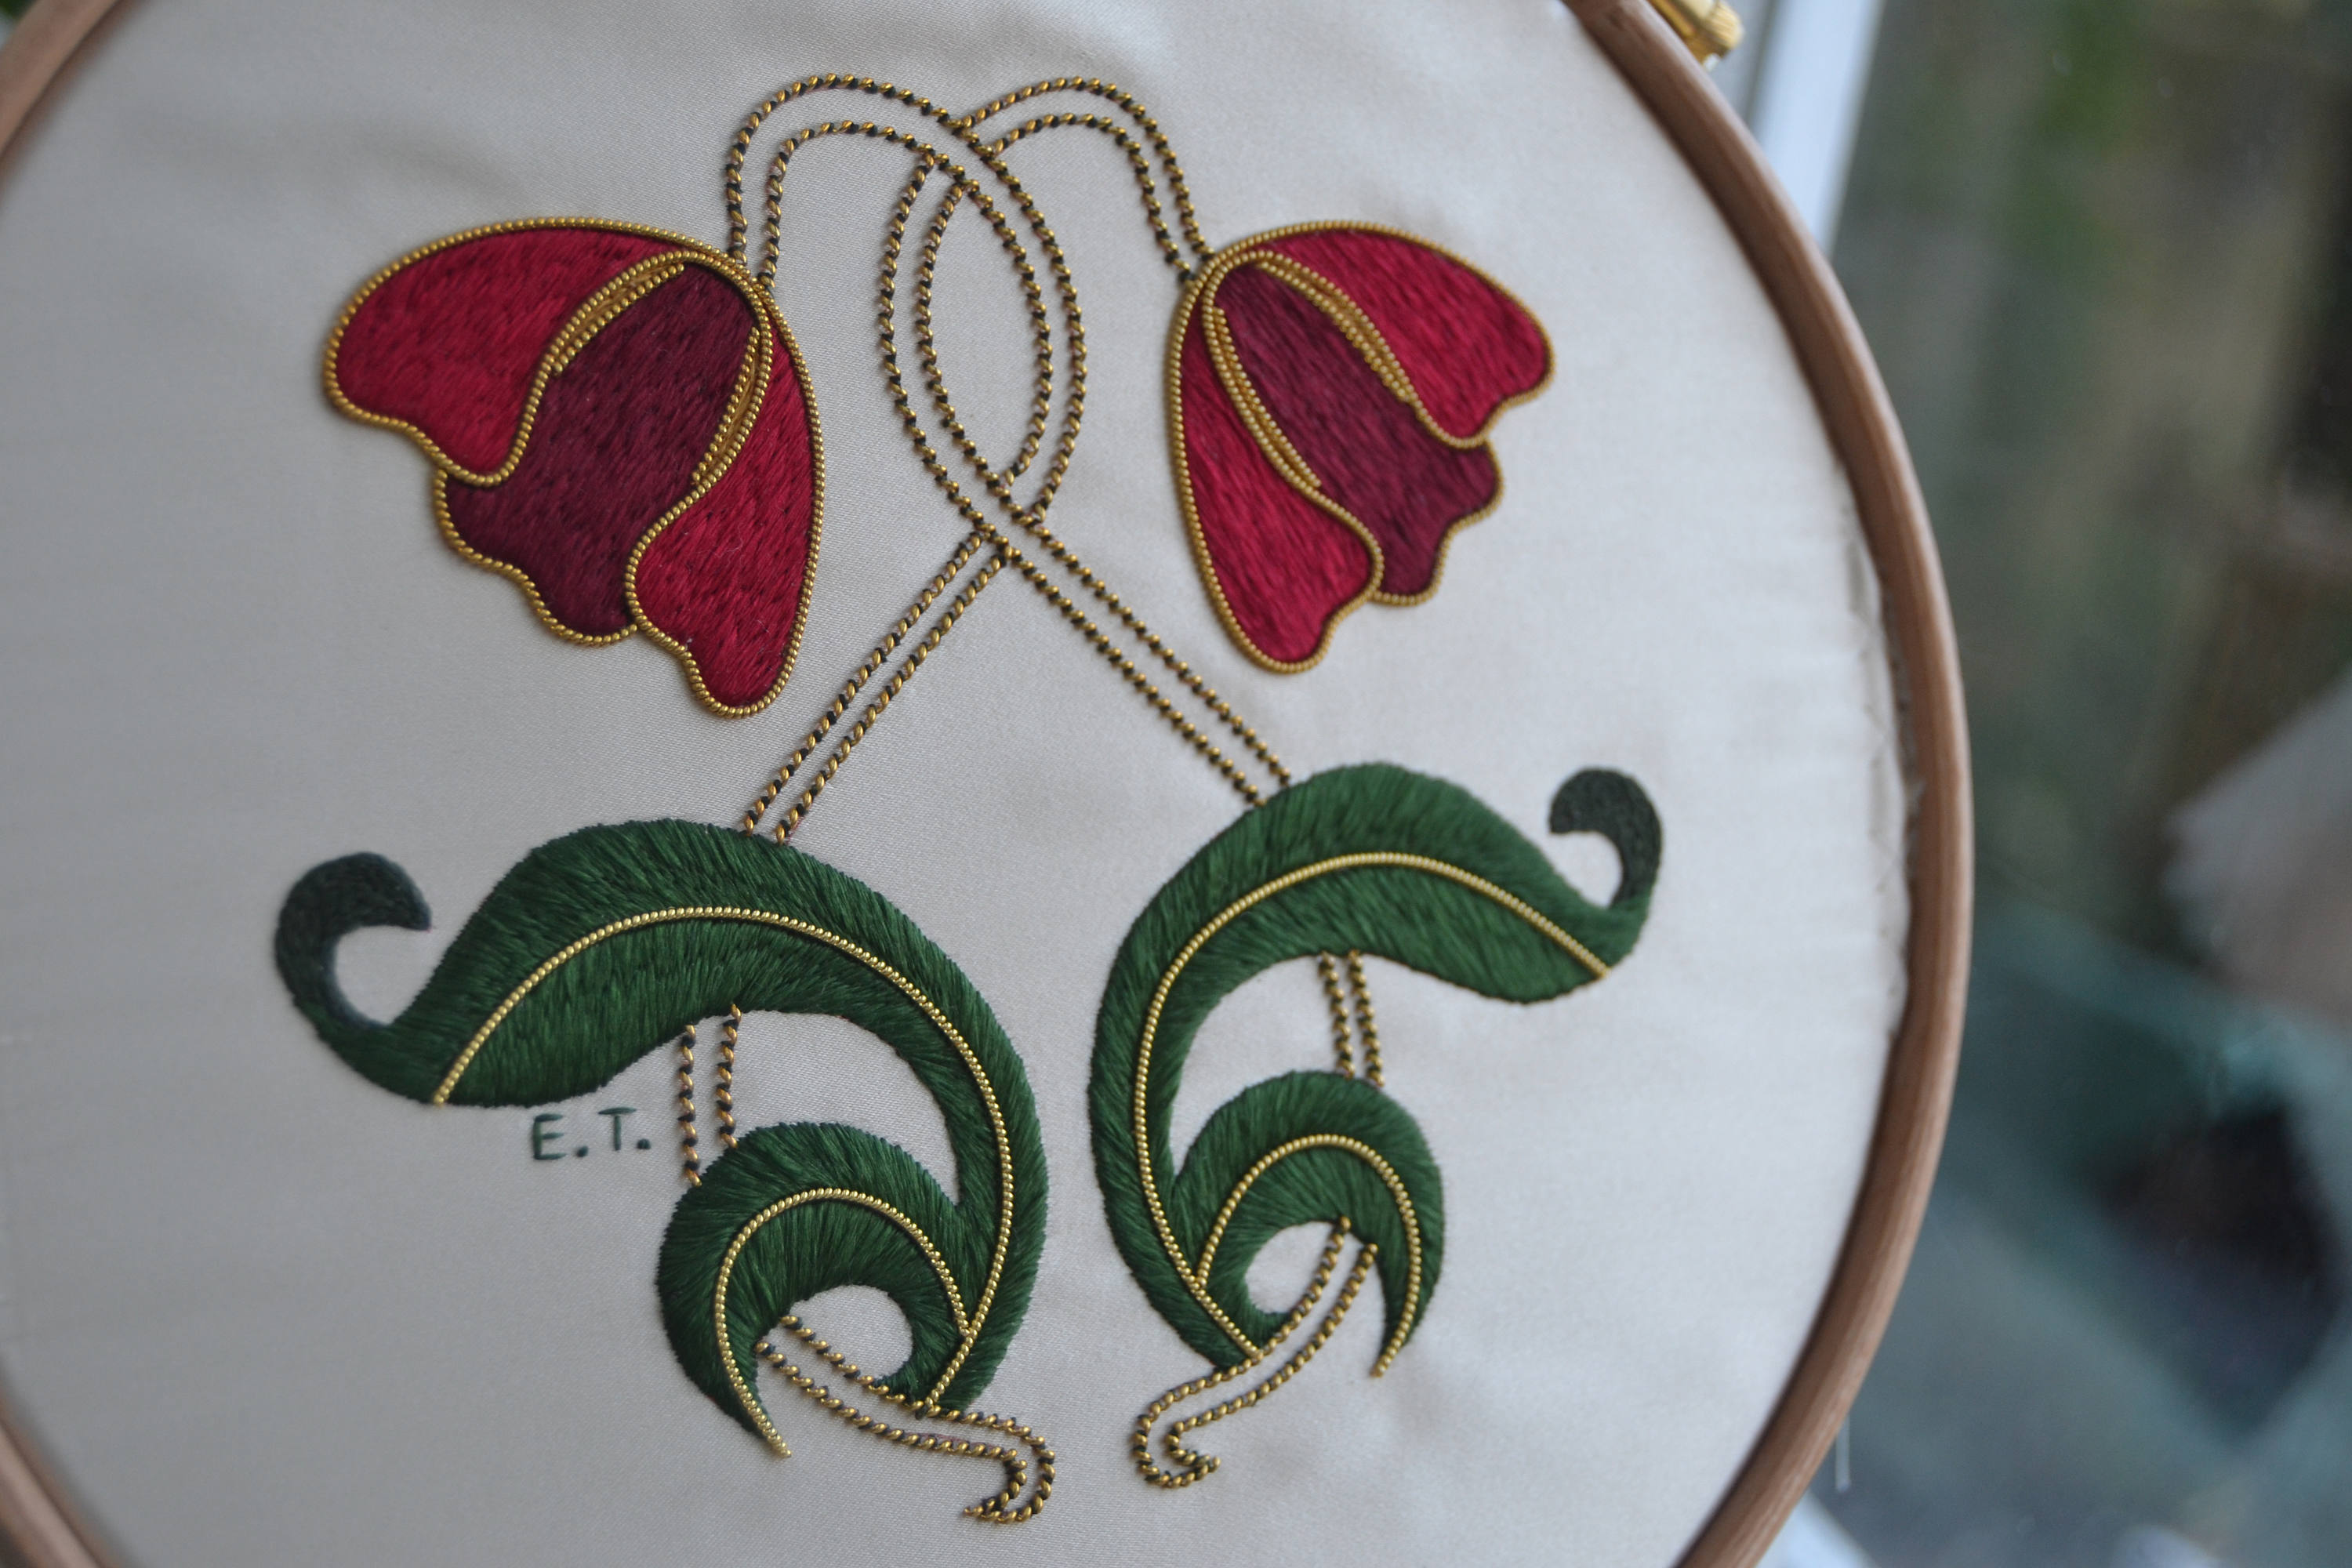 Tulip Tops Crewel Embroidery Kit - Beginner Embroidery at Weekend Kits